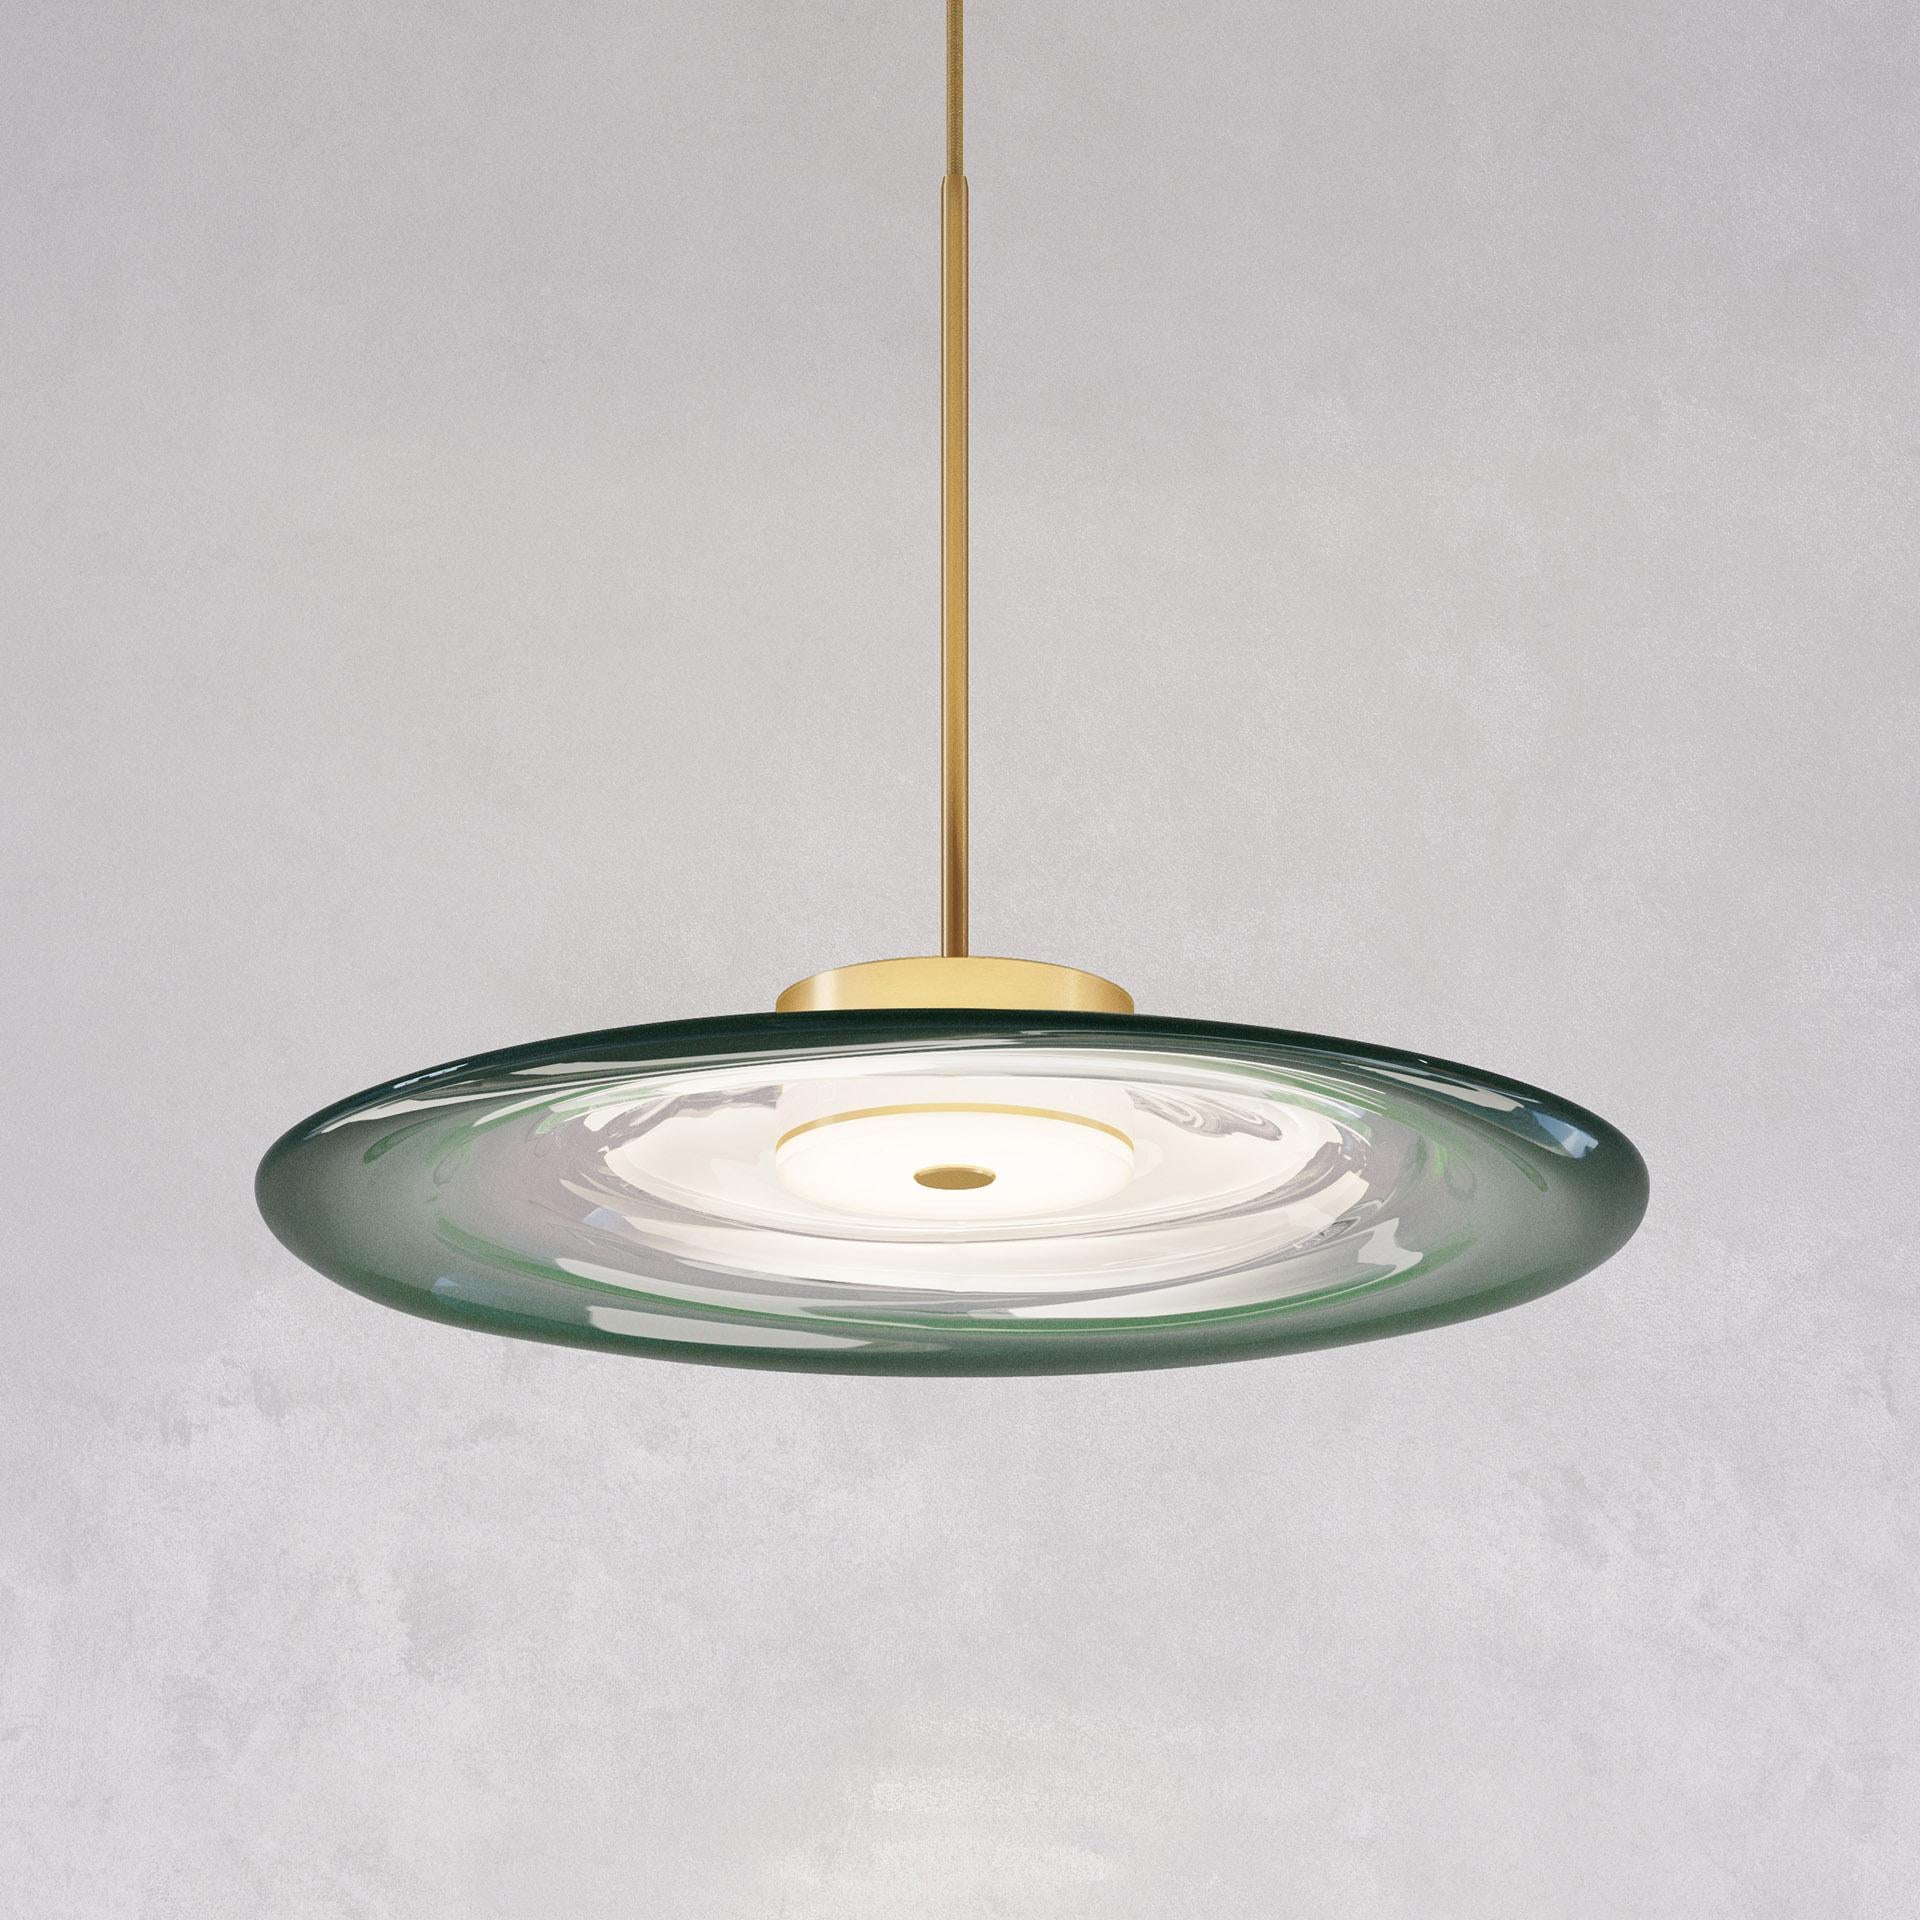 Liquid Pendant Jade by Atelier001
Dimensions: D50 x H38 cm
Materials: hand-blown glass, Brass.
Also available: In different finishes.

All our lamps can be wired according to each country. If sold to the USA it will be wired for the USA for